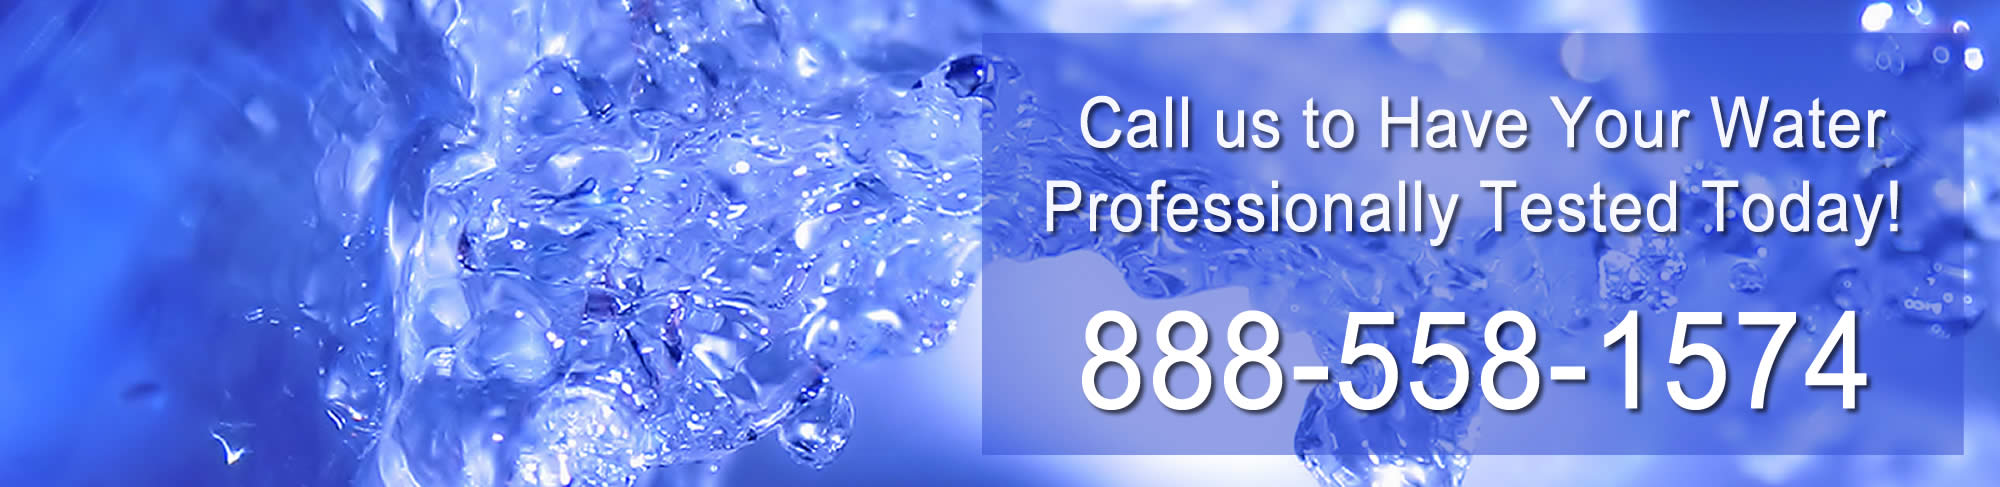 Specializing in Cheshire CT Water Testing and Analysis